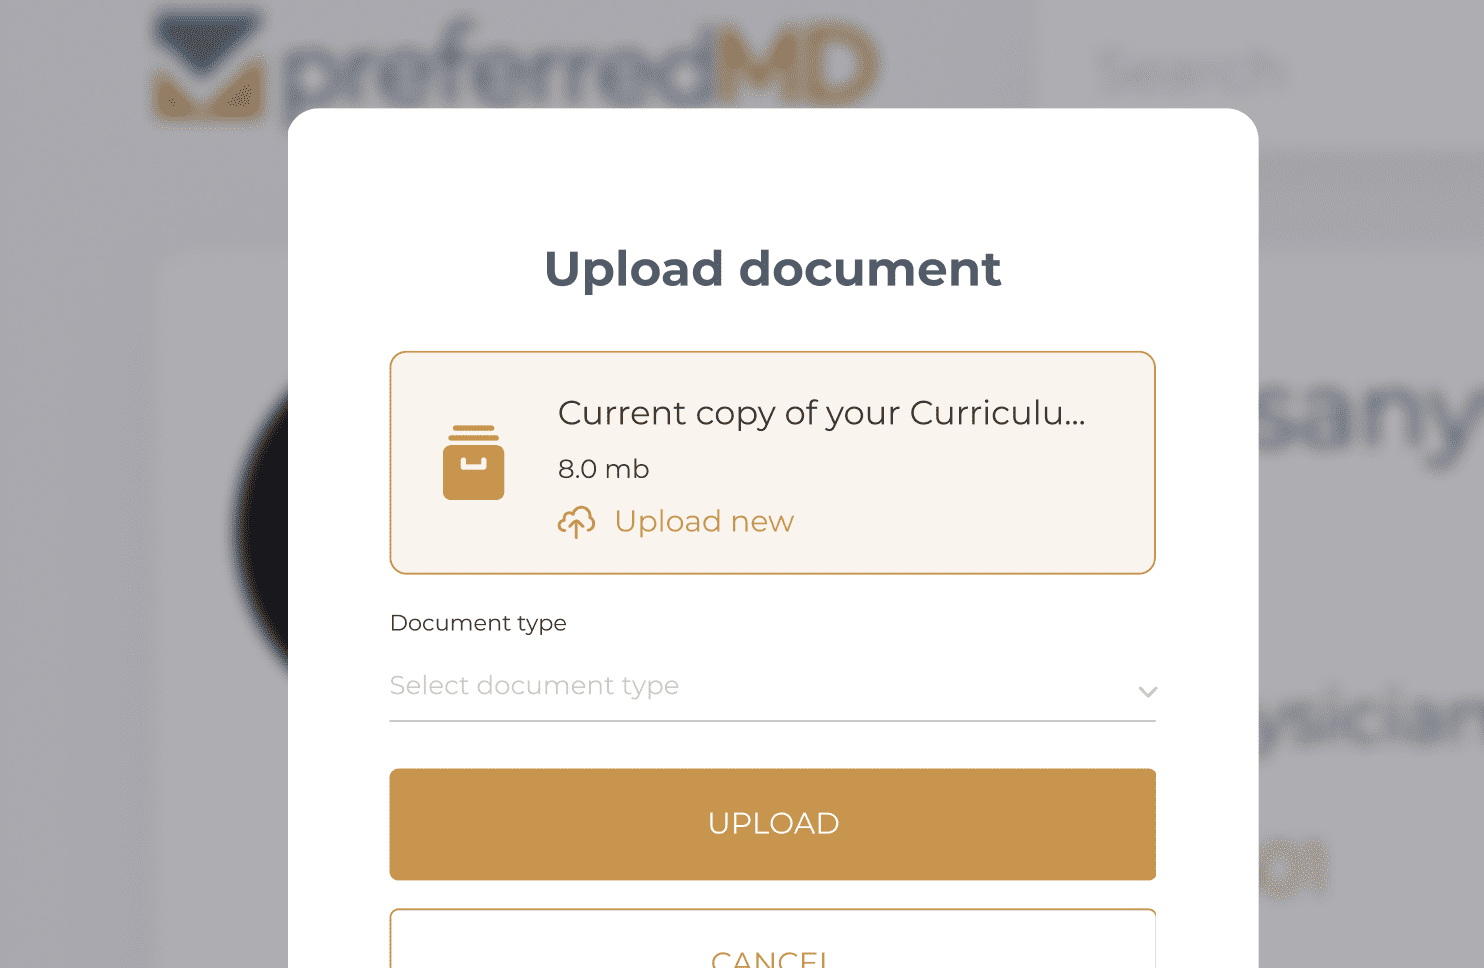 Send and receive all documentation in one convenient platform.